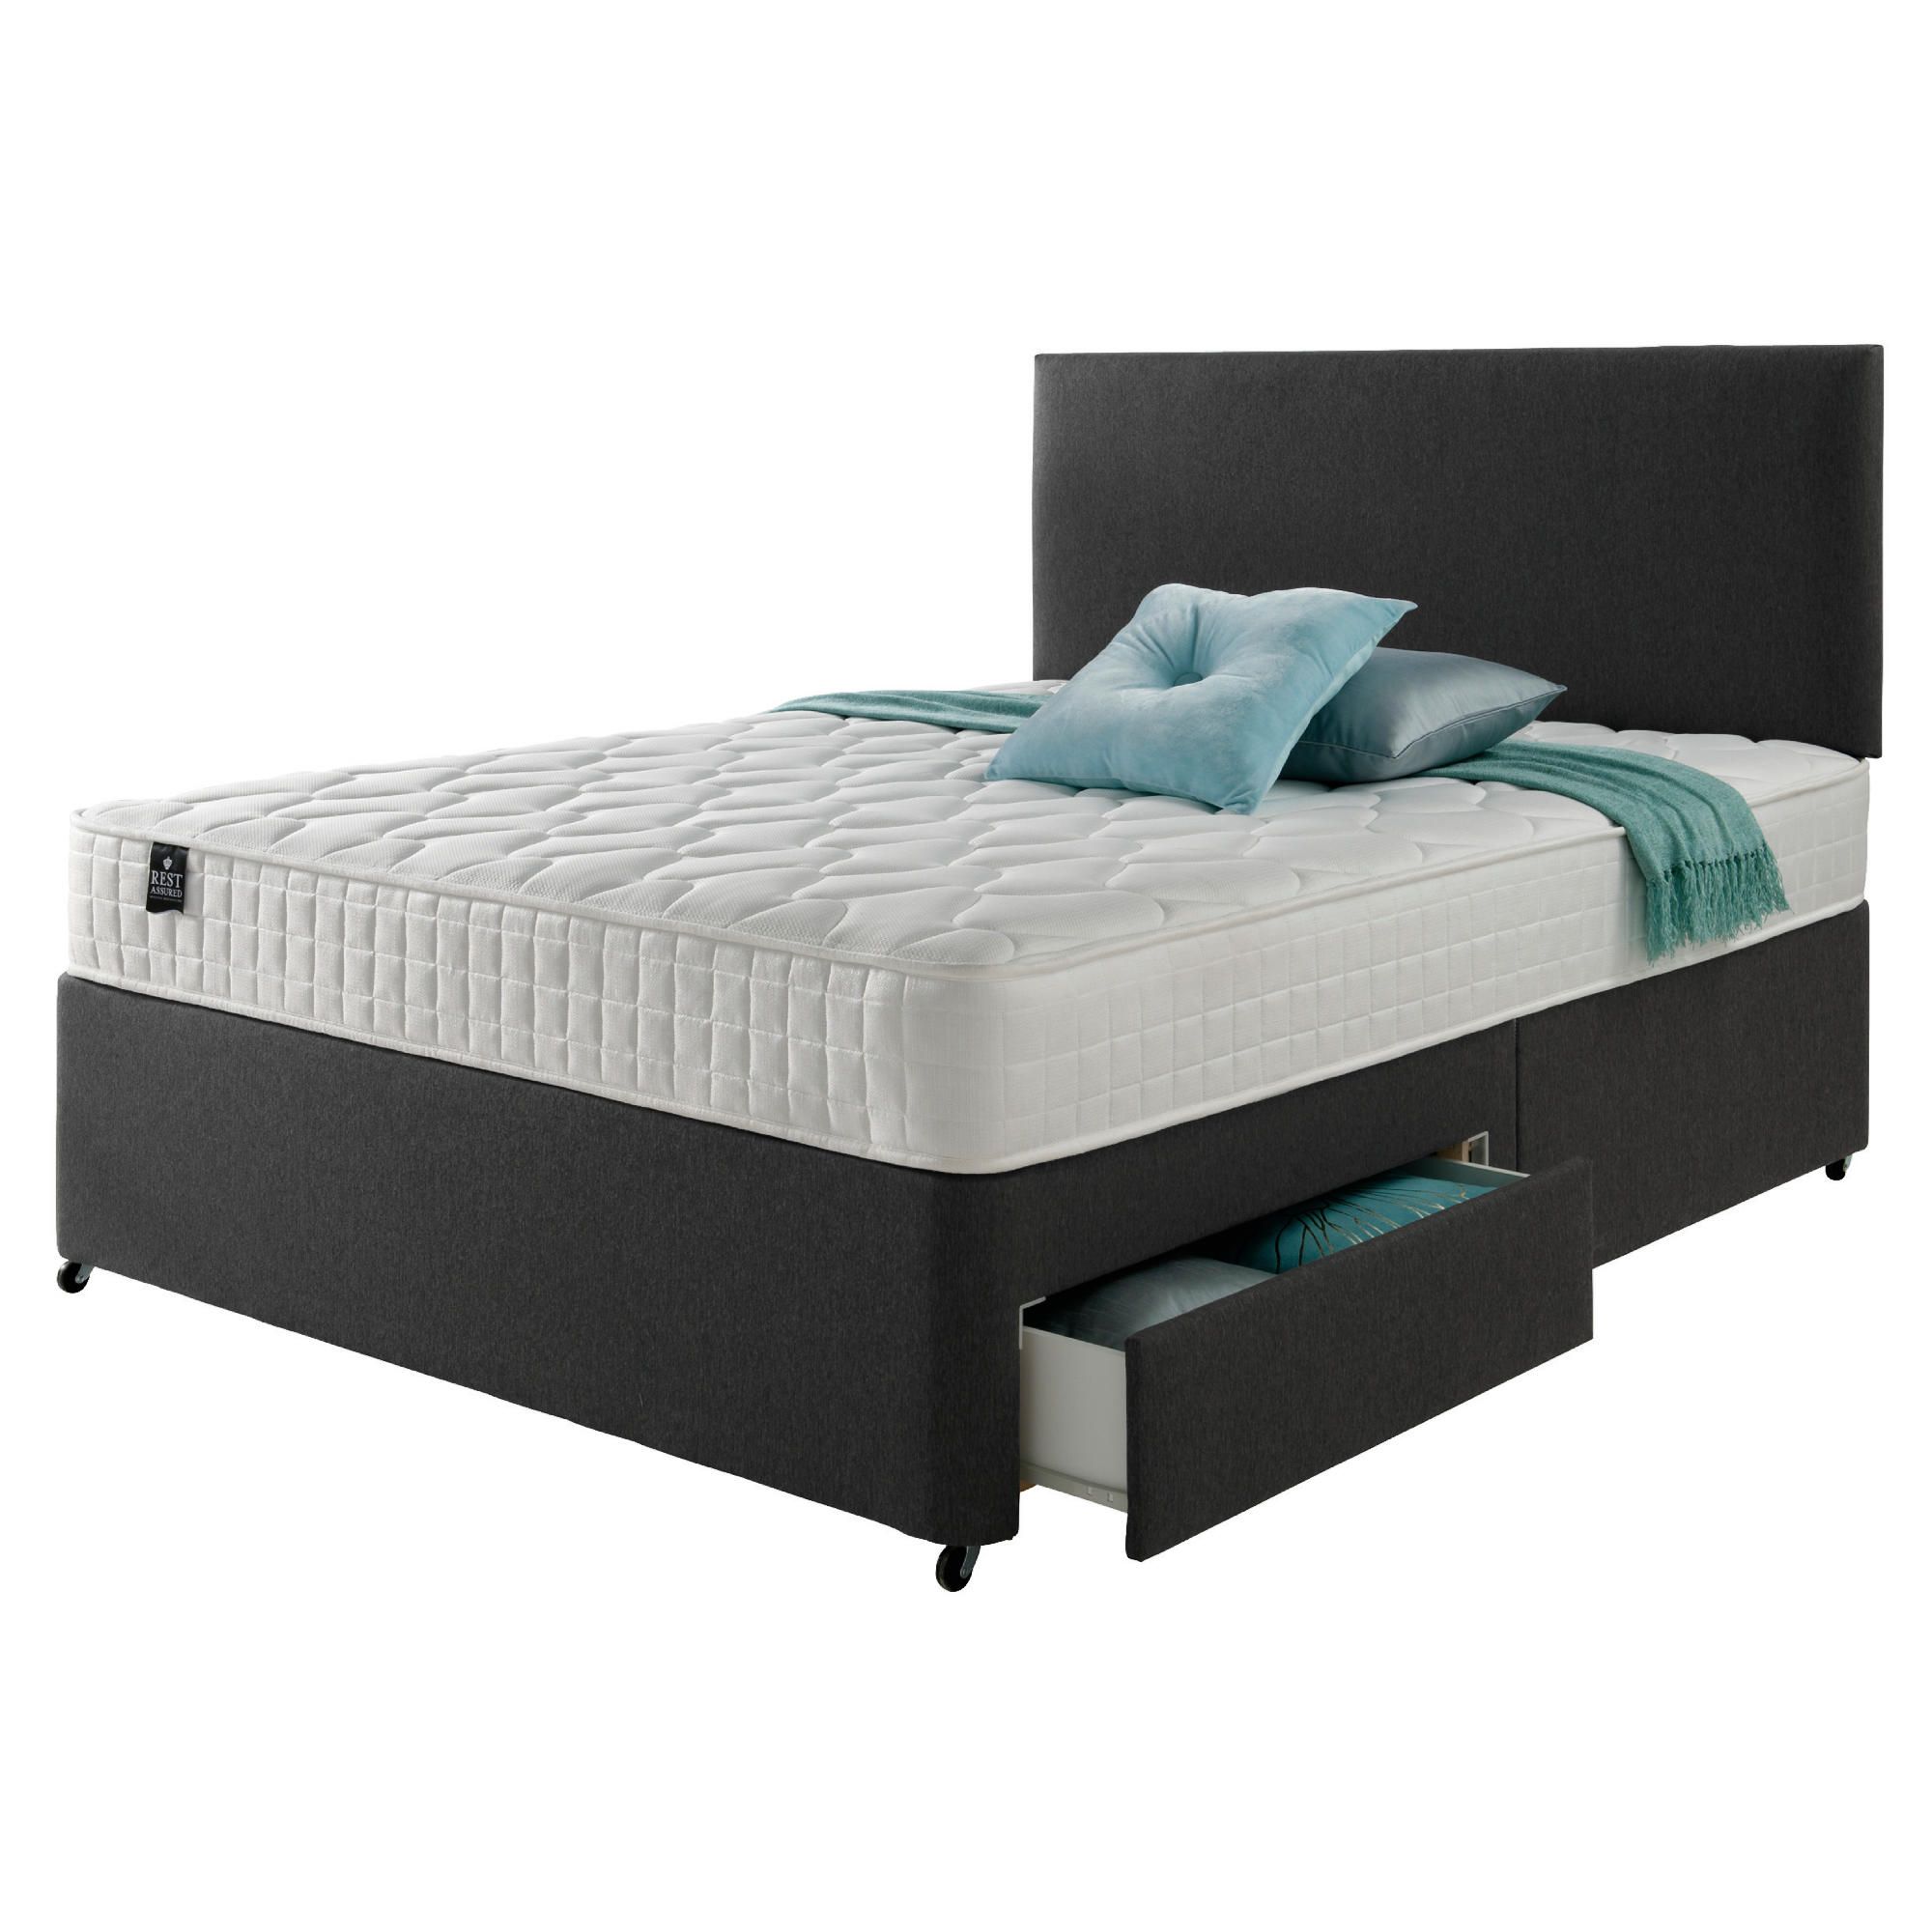 Rest Assured Classic 4 Drawer Double Divan and Headboard Charcoal at Tesco Direct